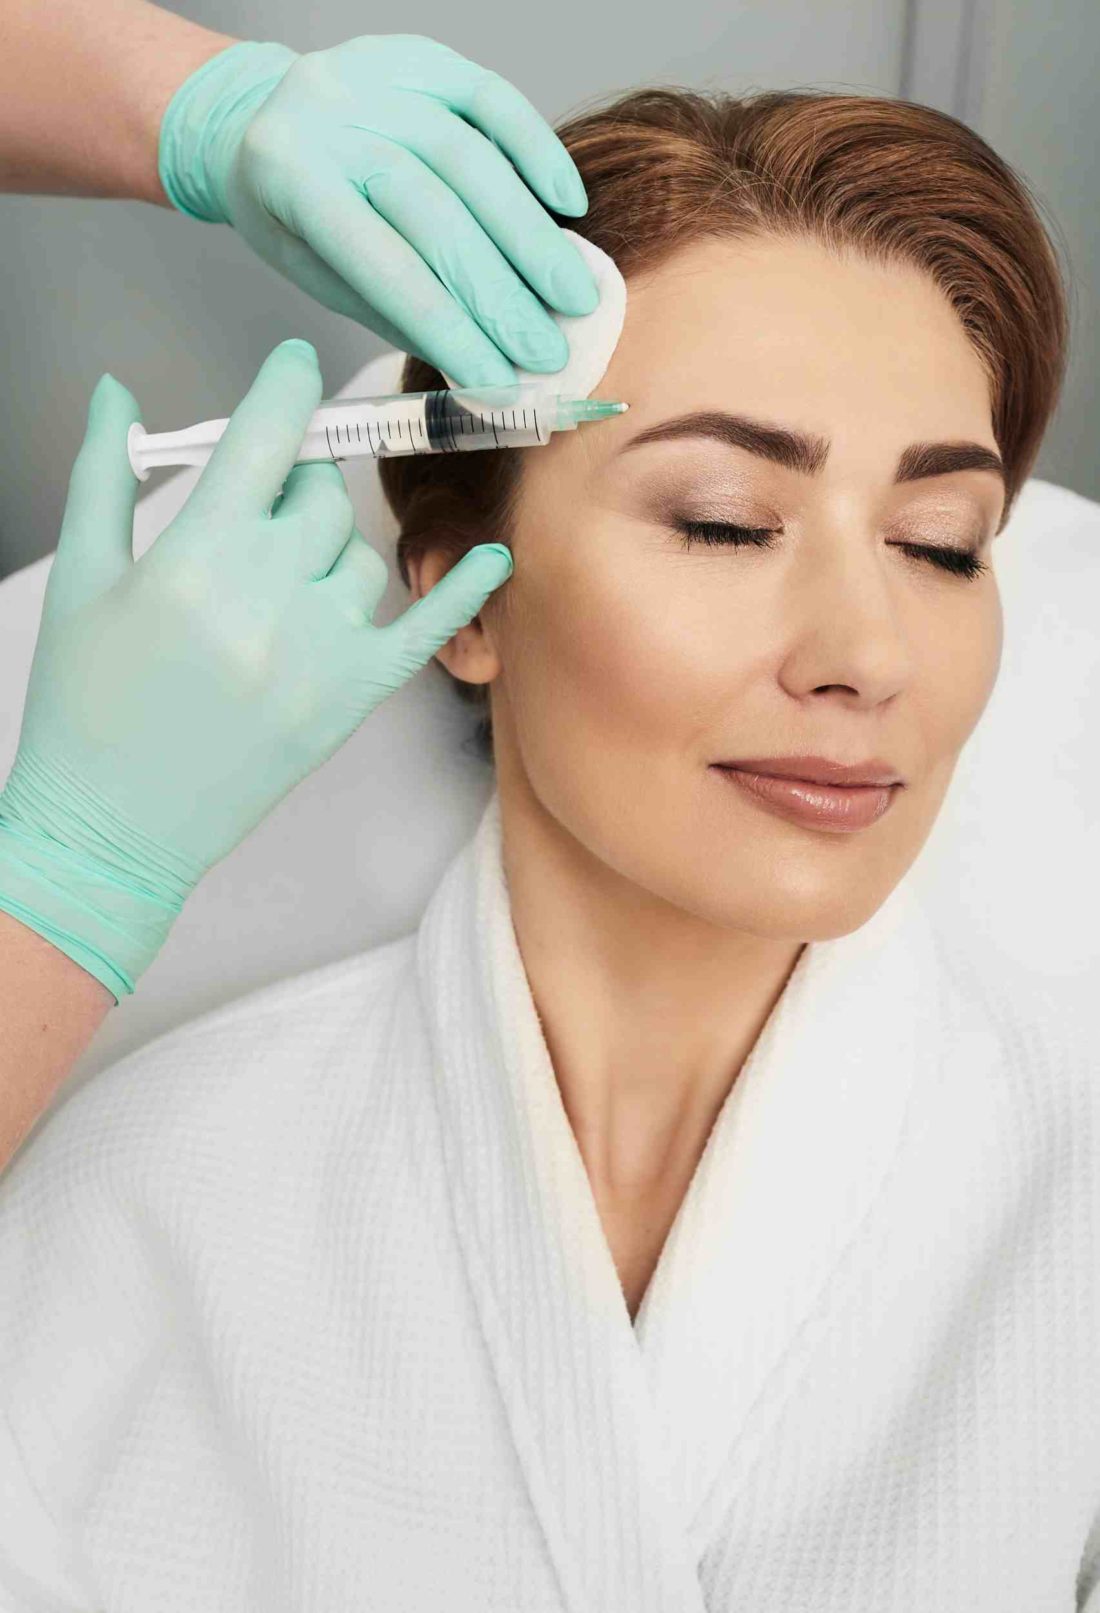 5 Aesthetic Injectable Treatments For Anti-Aging